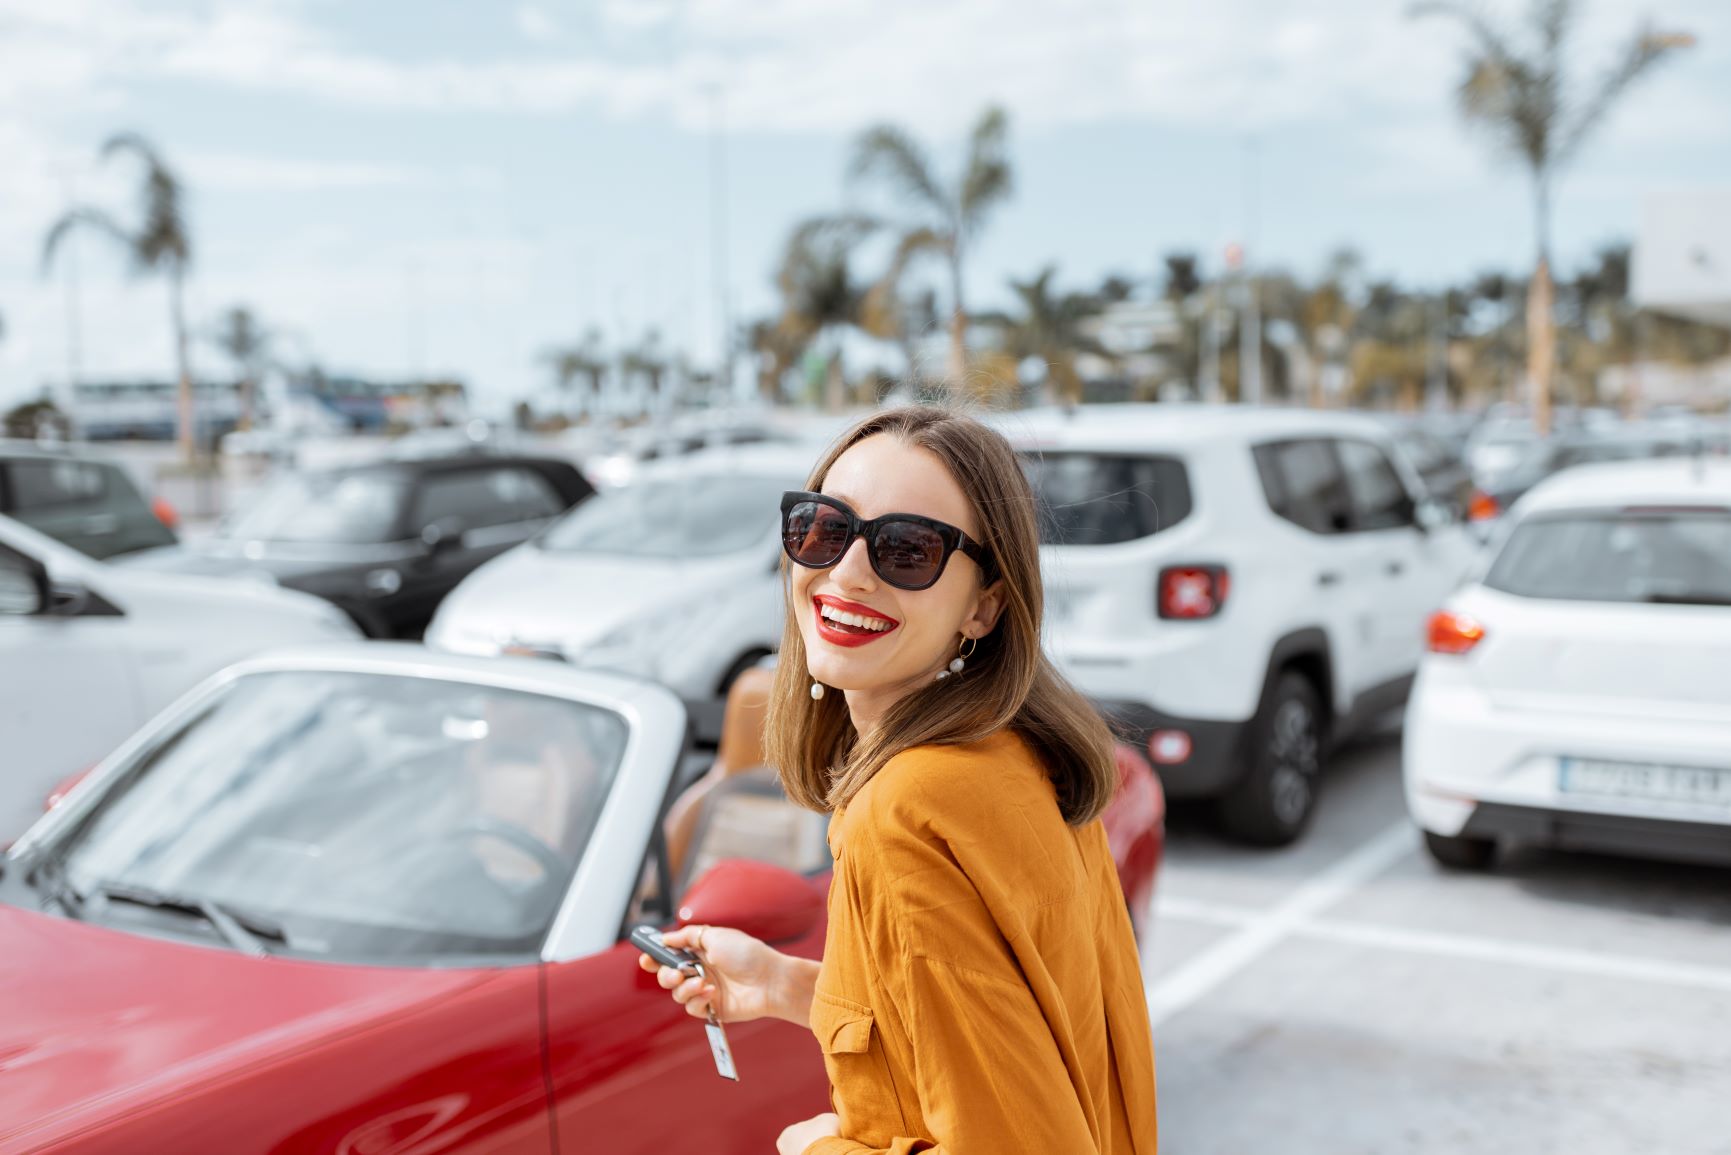 Should you purchase insurance for your rental car?